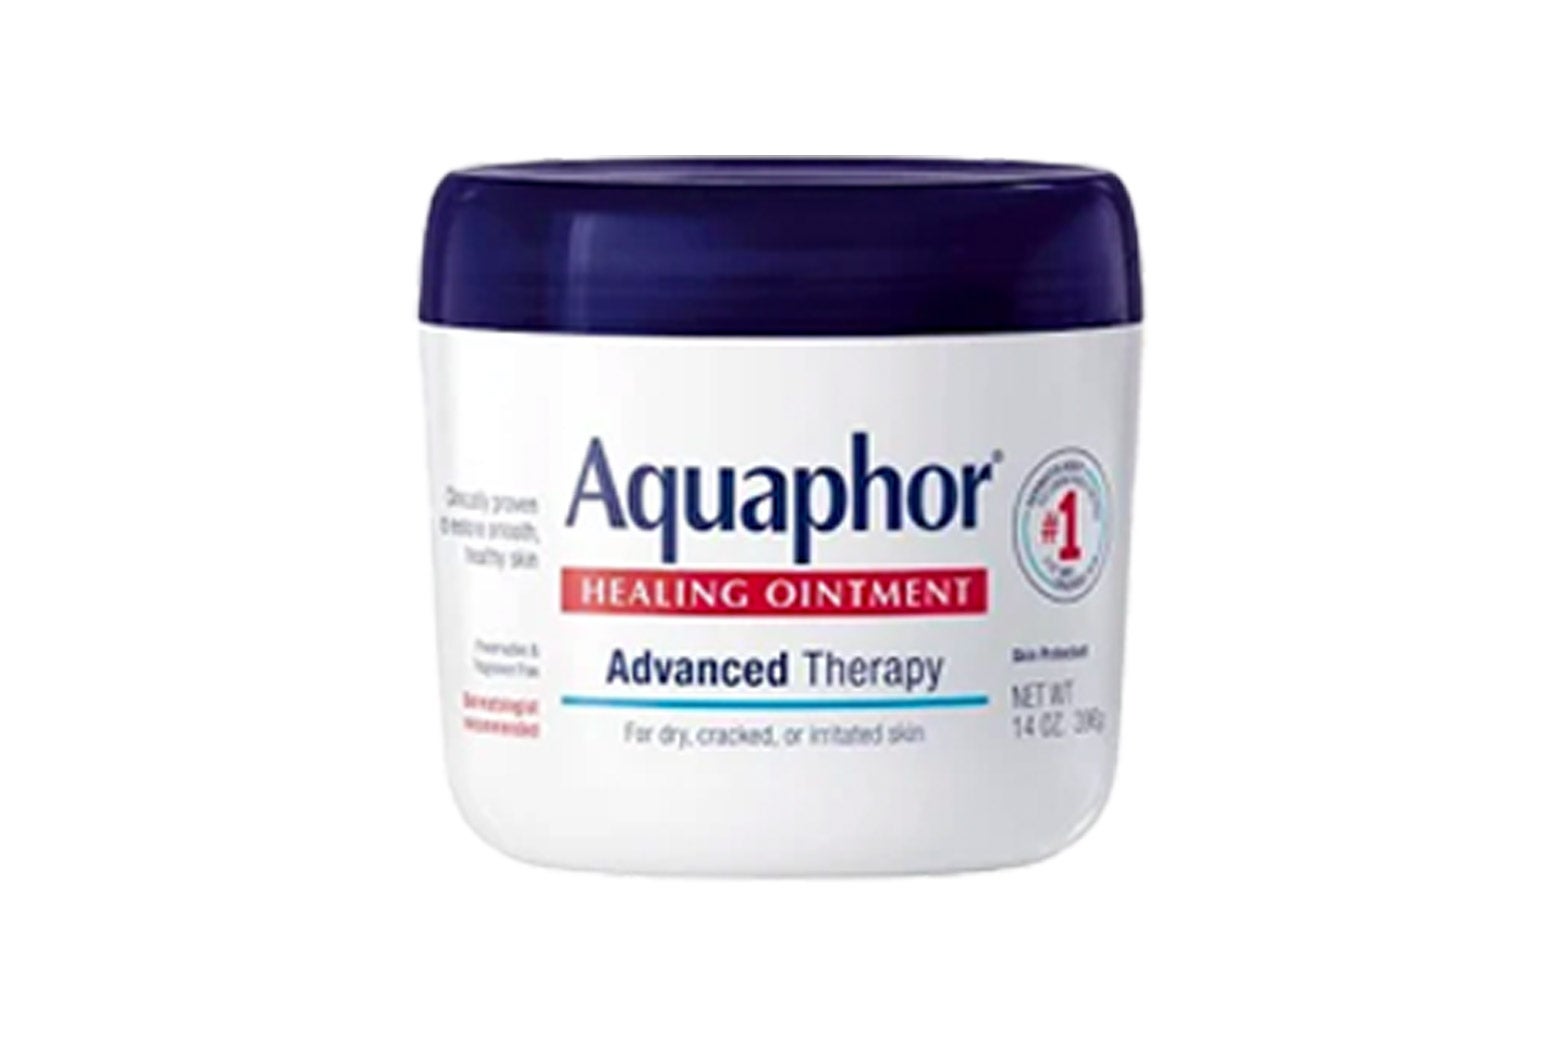 A white tub of Aquaphor Healing Ointment with a blue lid.